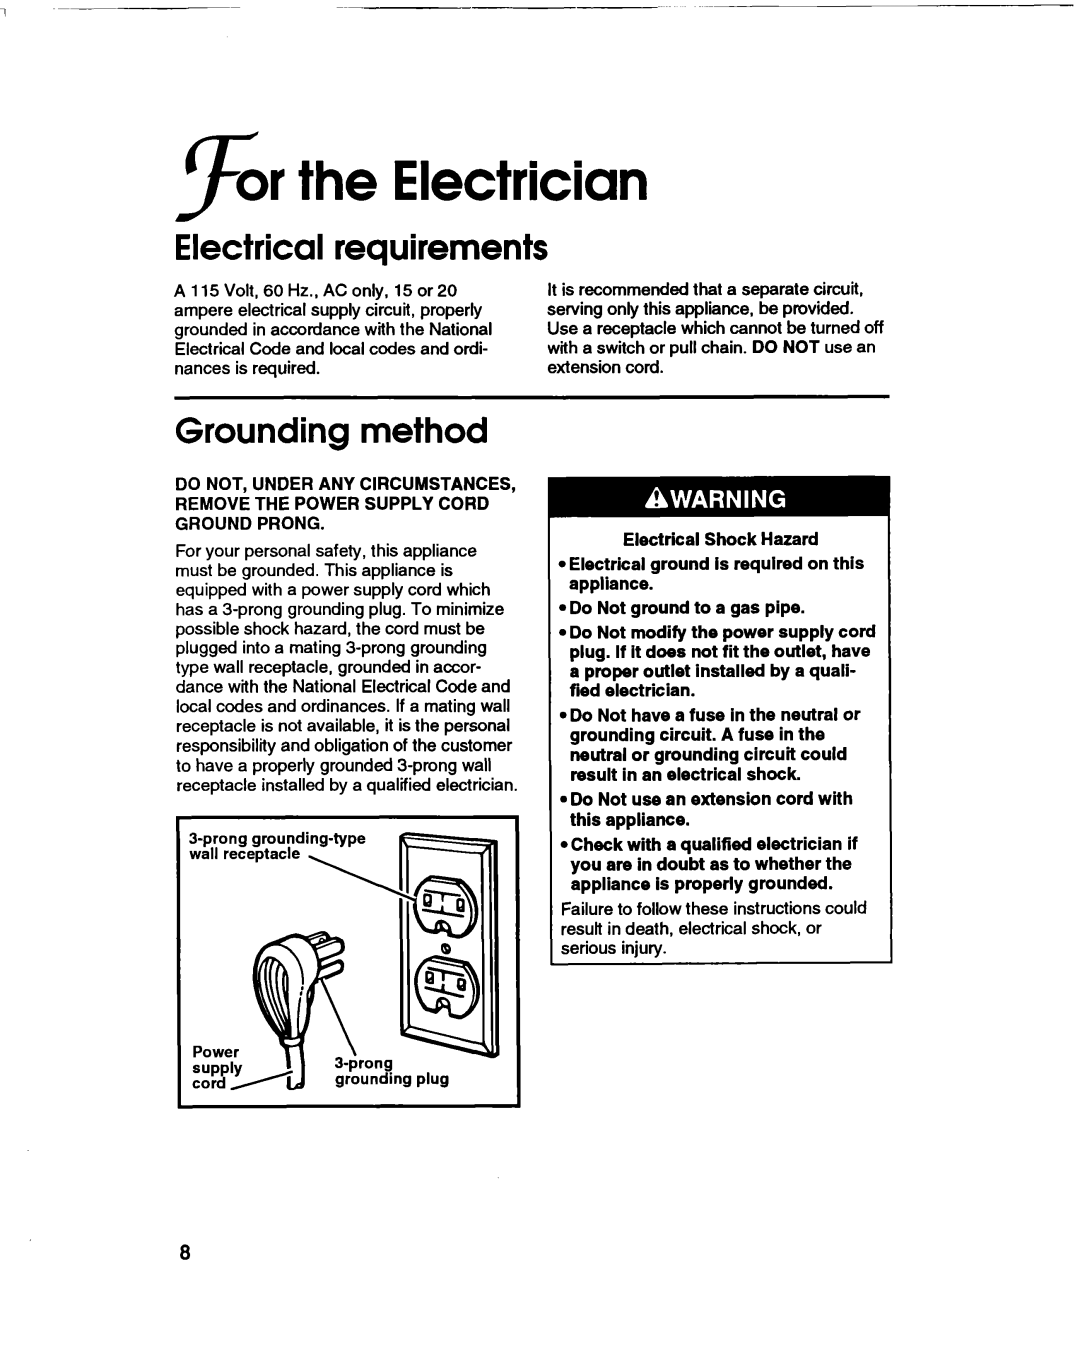 KitchenAid KULSL85 installation instructions For the Electrician, Electrical requirements, Grounding method 